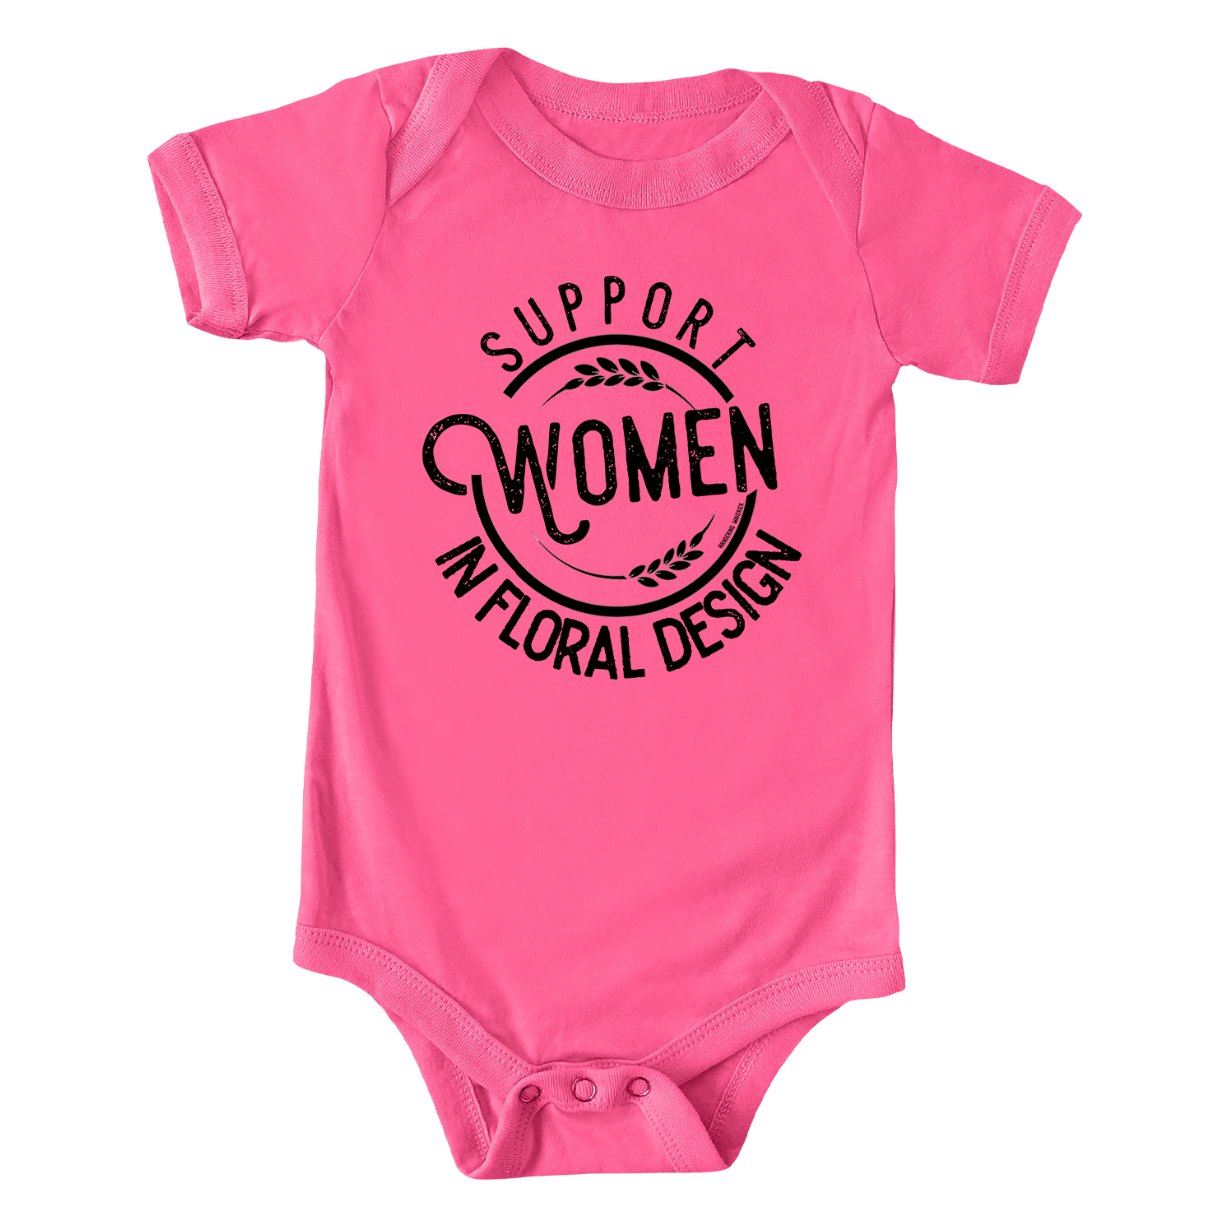 Support Women In Floral Design One Piece/T-Shirt (Newborn - Youth XL) - Multiple Colors!